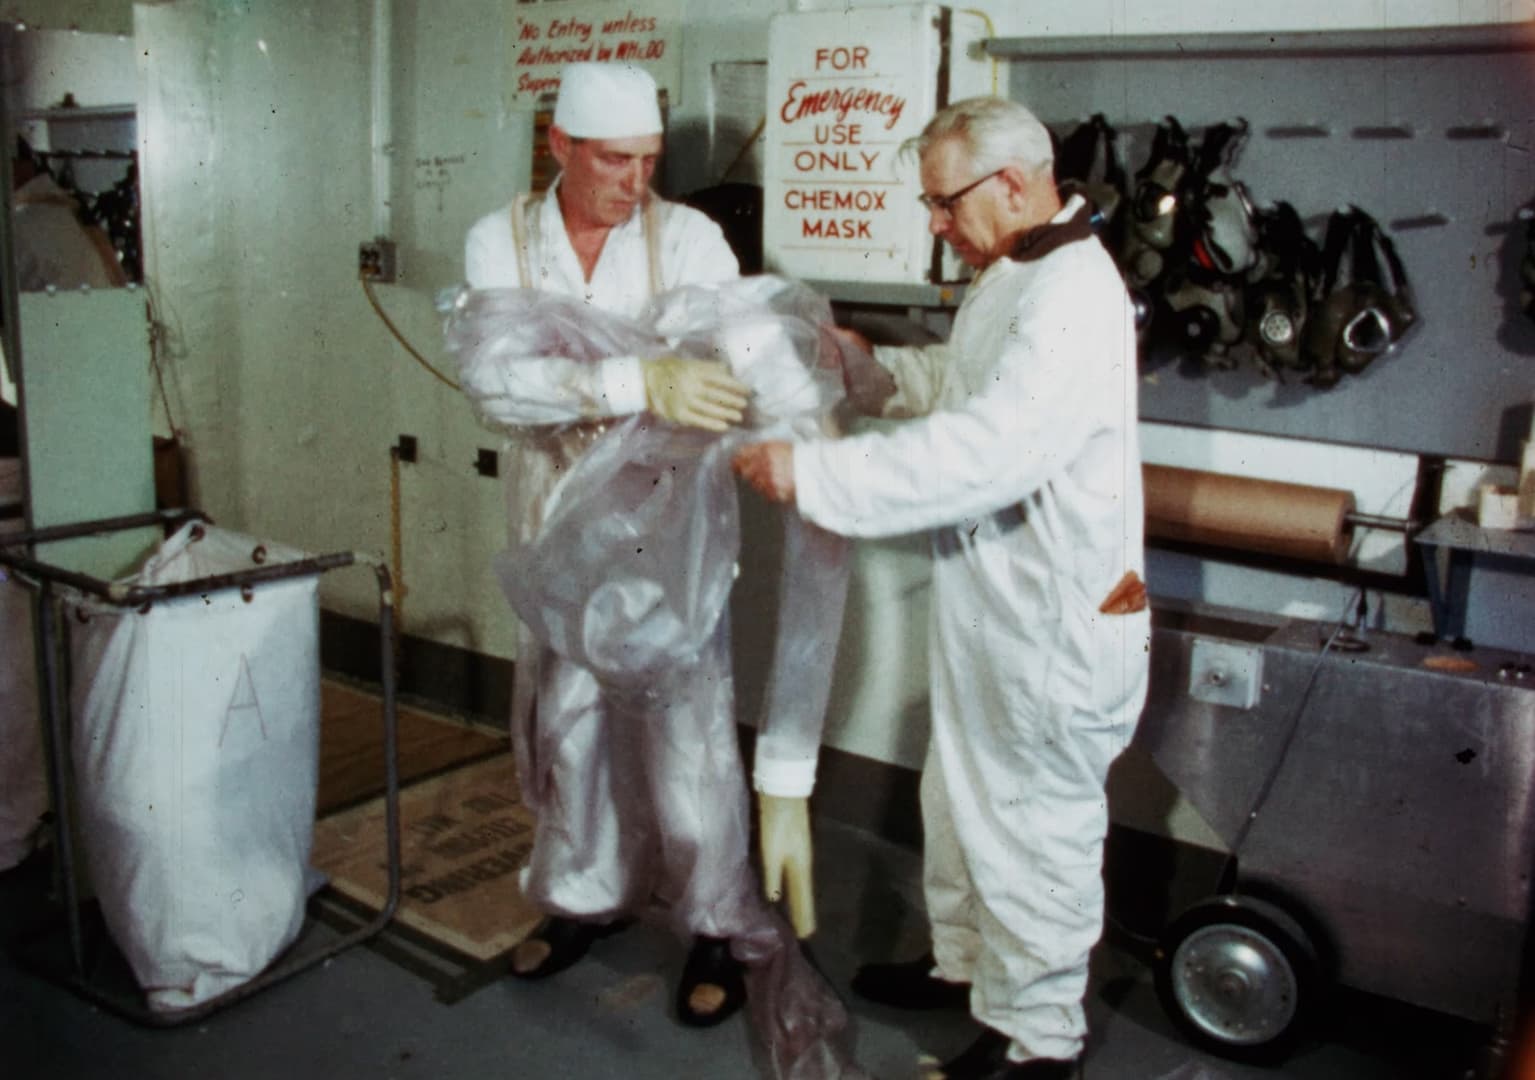 Two men in white suits and gloves holding a plastic bag on a nuclear plant, one assisting the other with a protective suit.